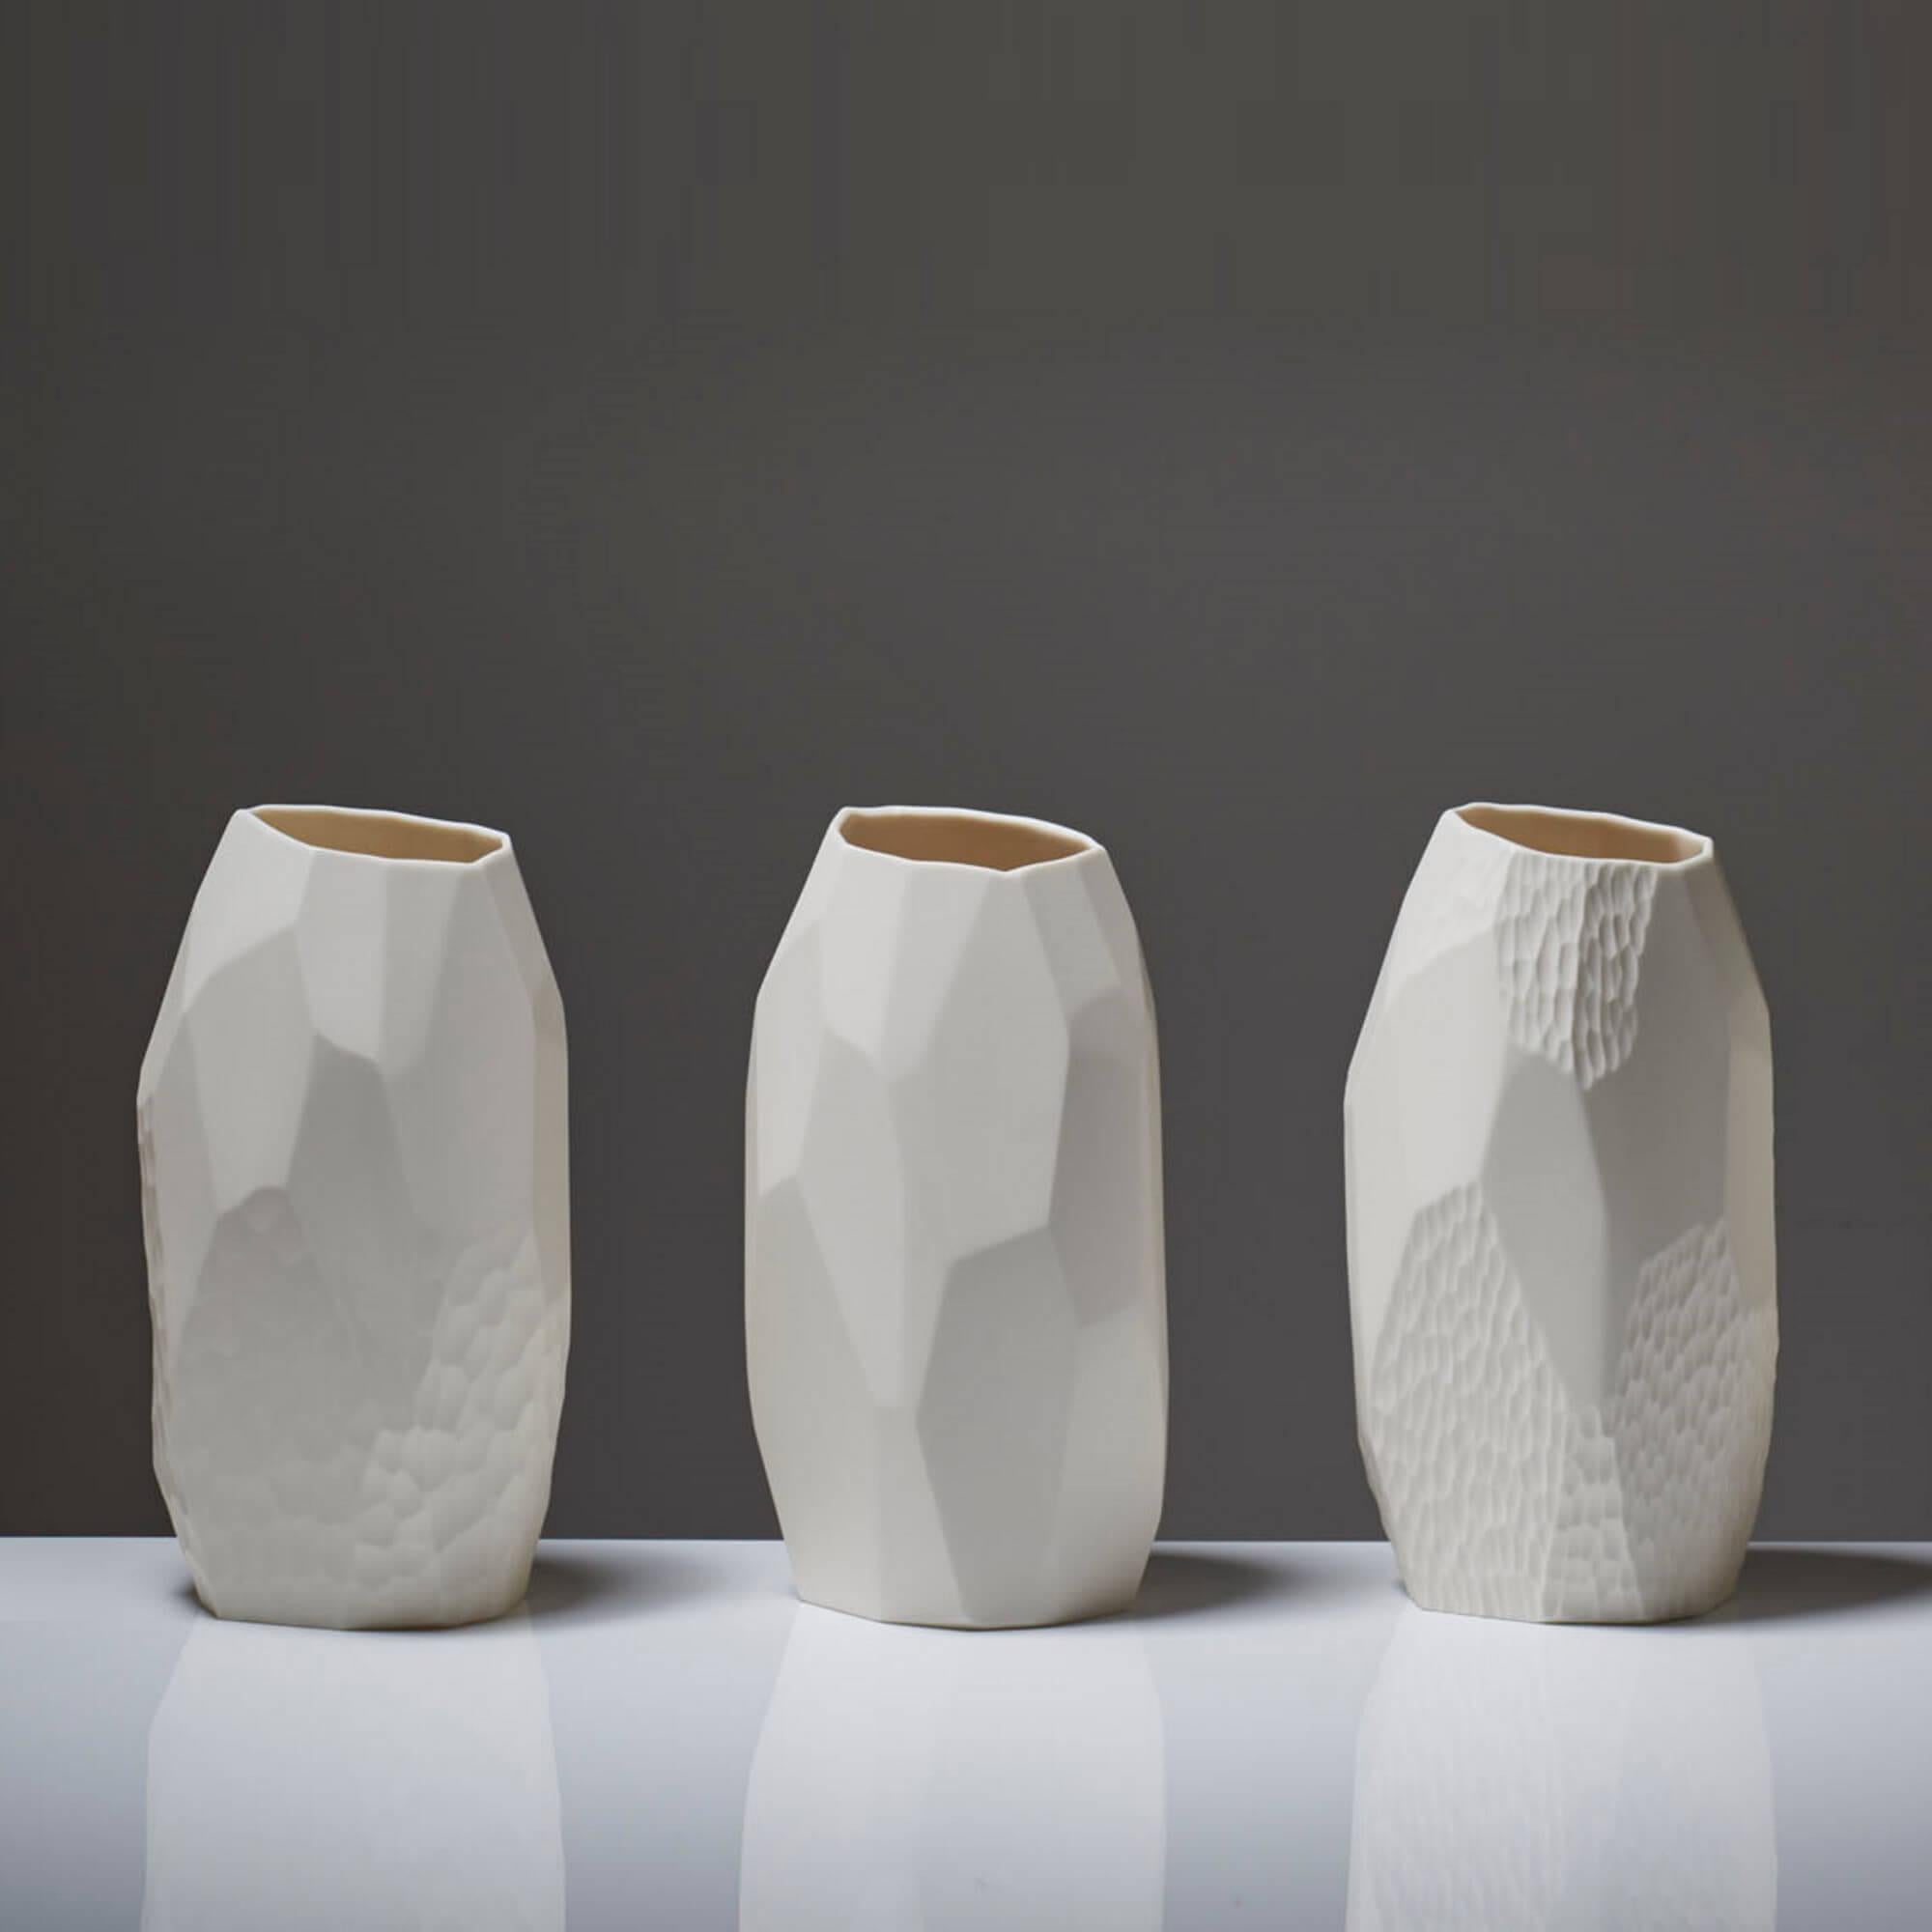 Inspired by rock formation, Fragments is a collection of porcelain vases, the largest yet produced by the duo. Each porcelain vase is made using traditional slip casting technique, where liquid clay in poured into a plaster mould and allowed to form